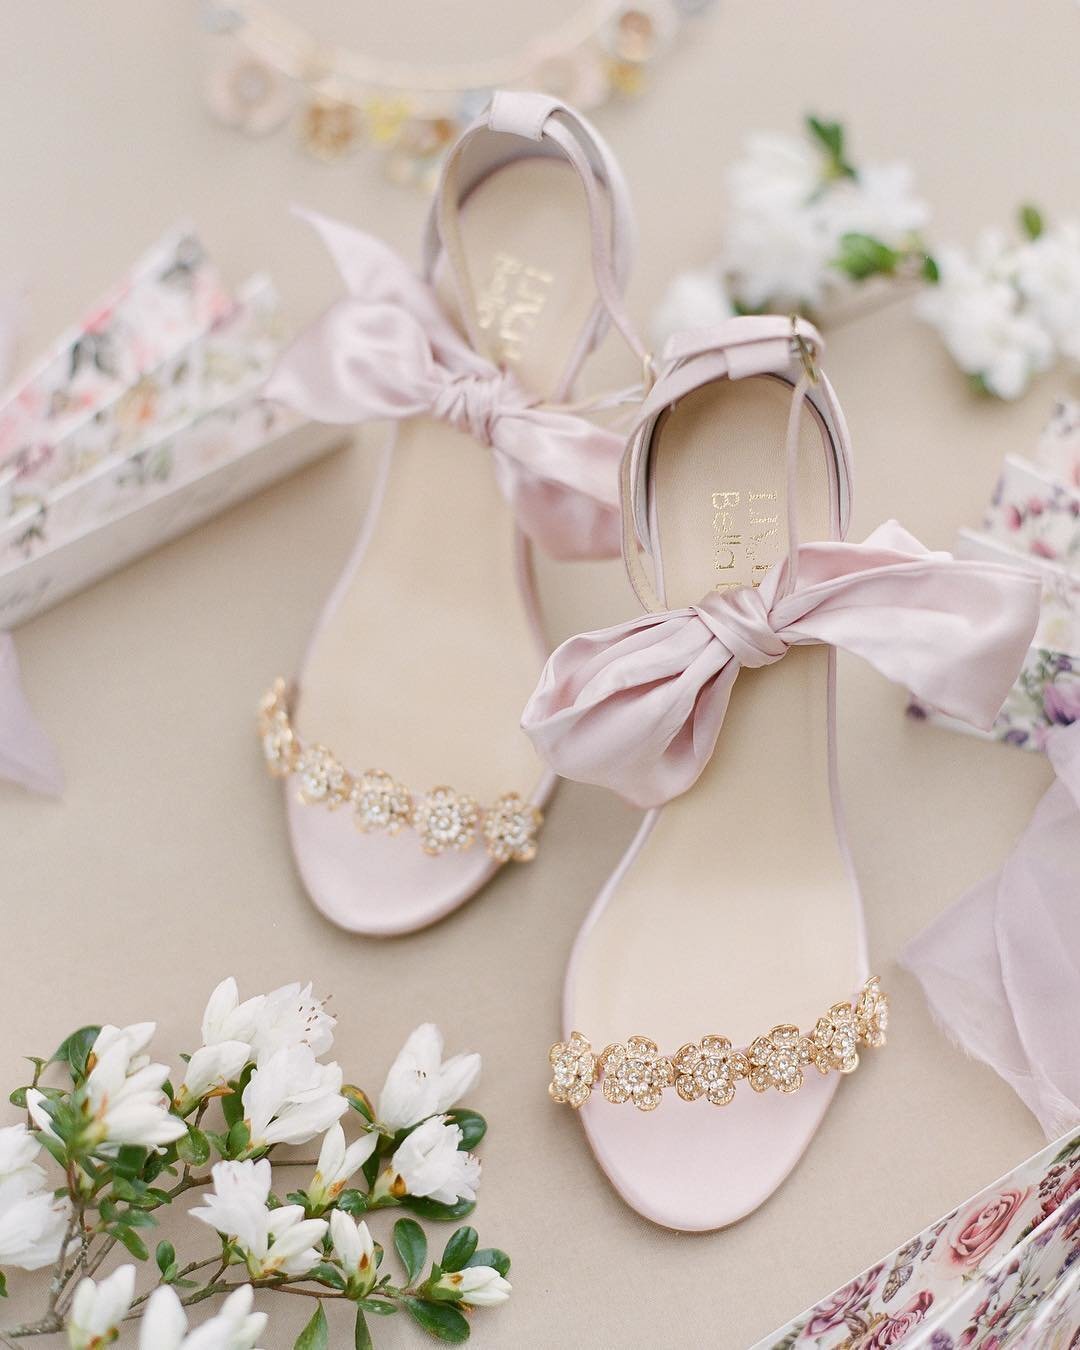 Pink silk bridal heels from Bella Belle Shoes with a romantic bow and floral embellished straps